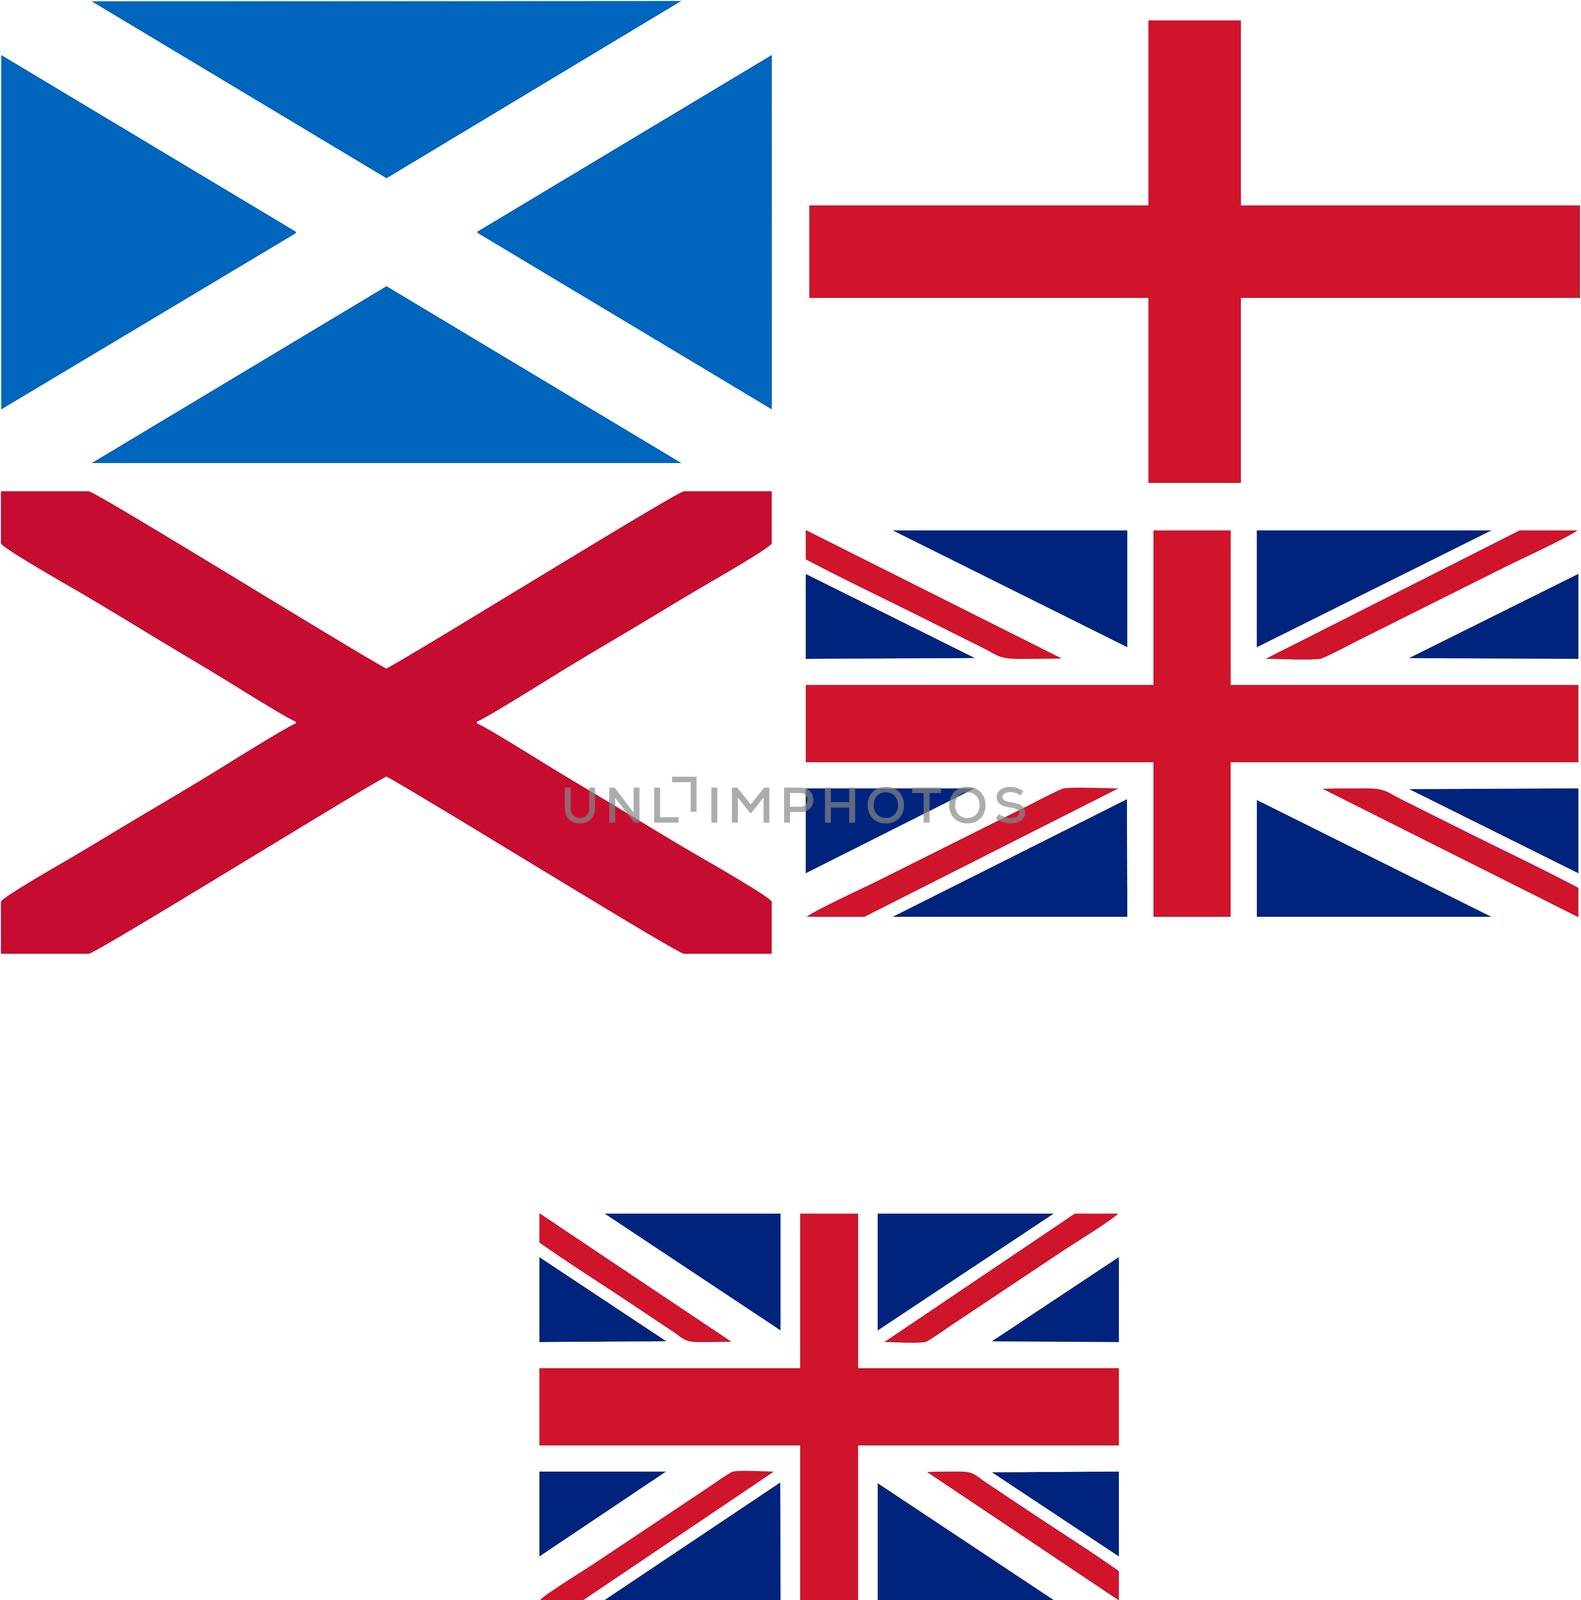 UK flag by paolo77